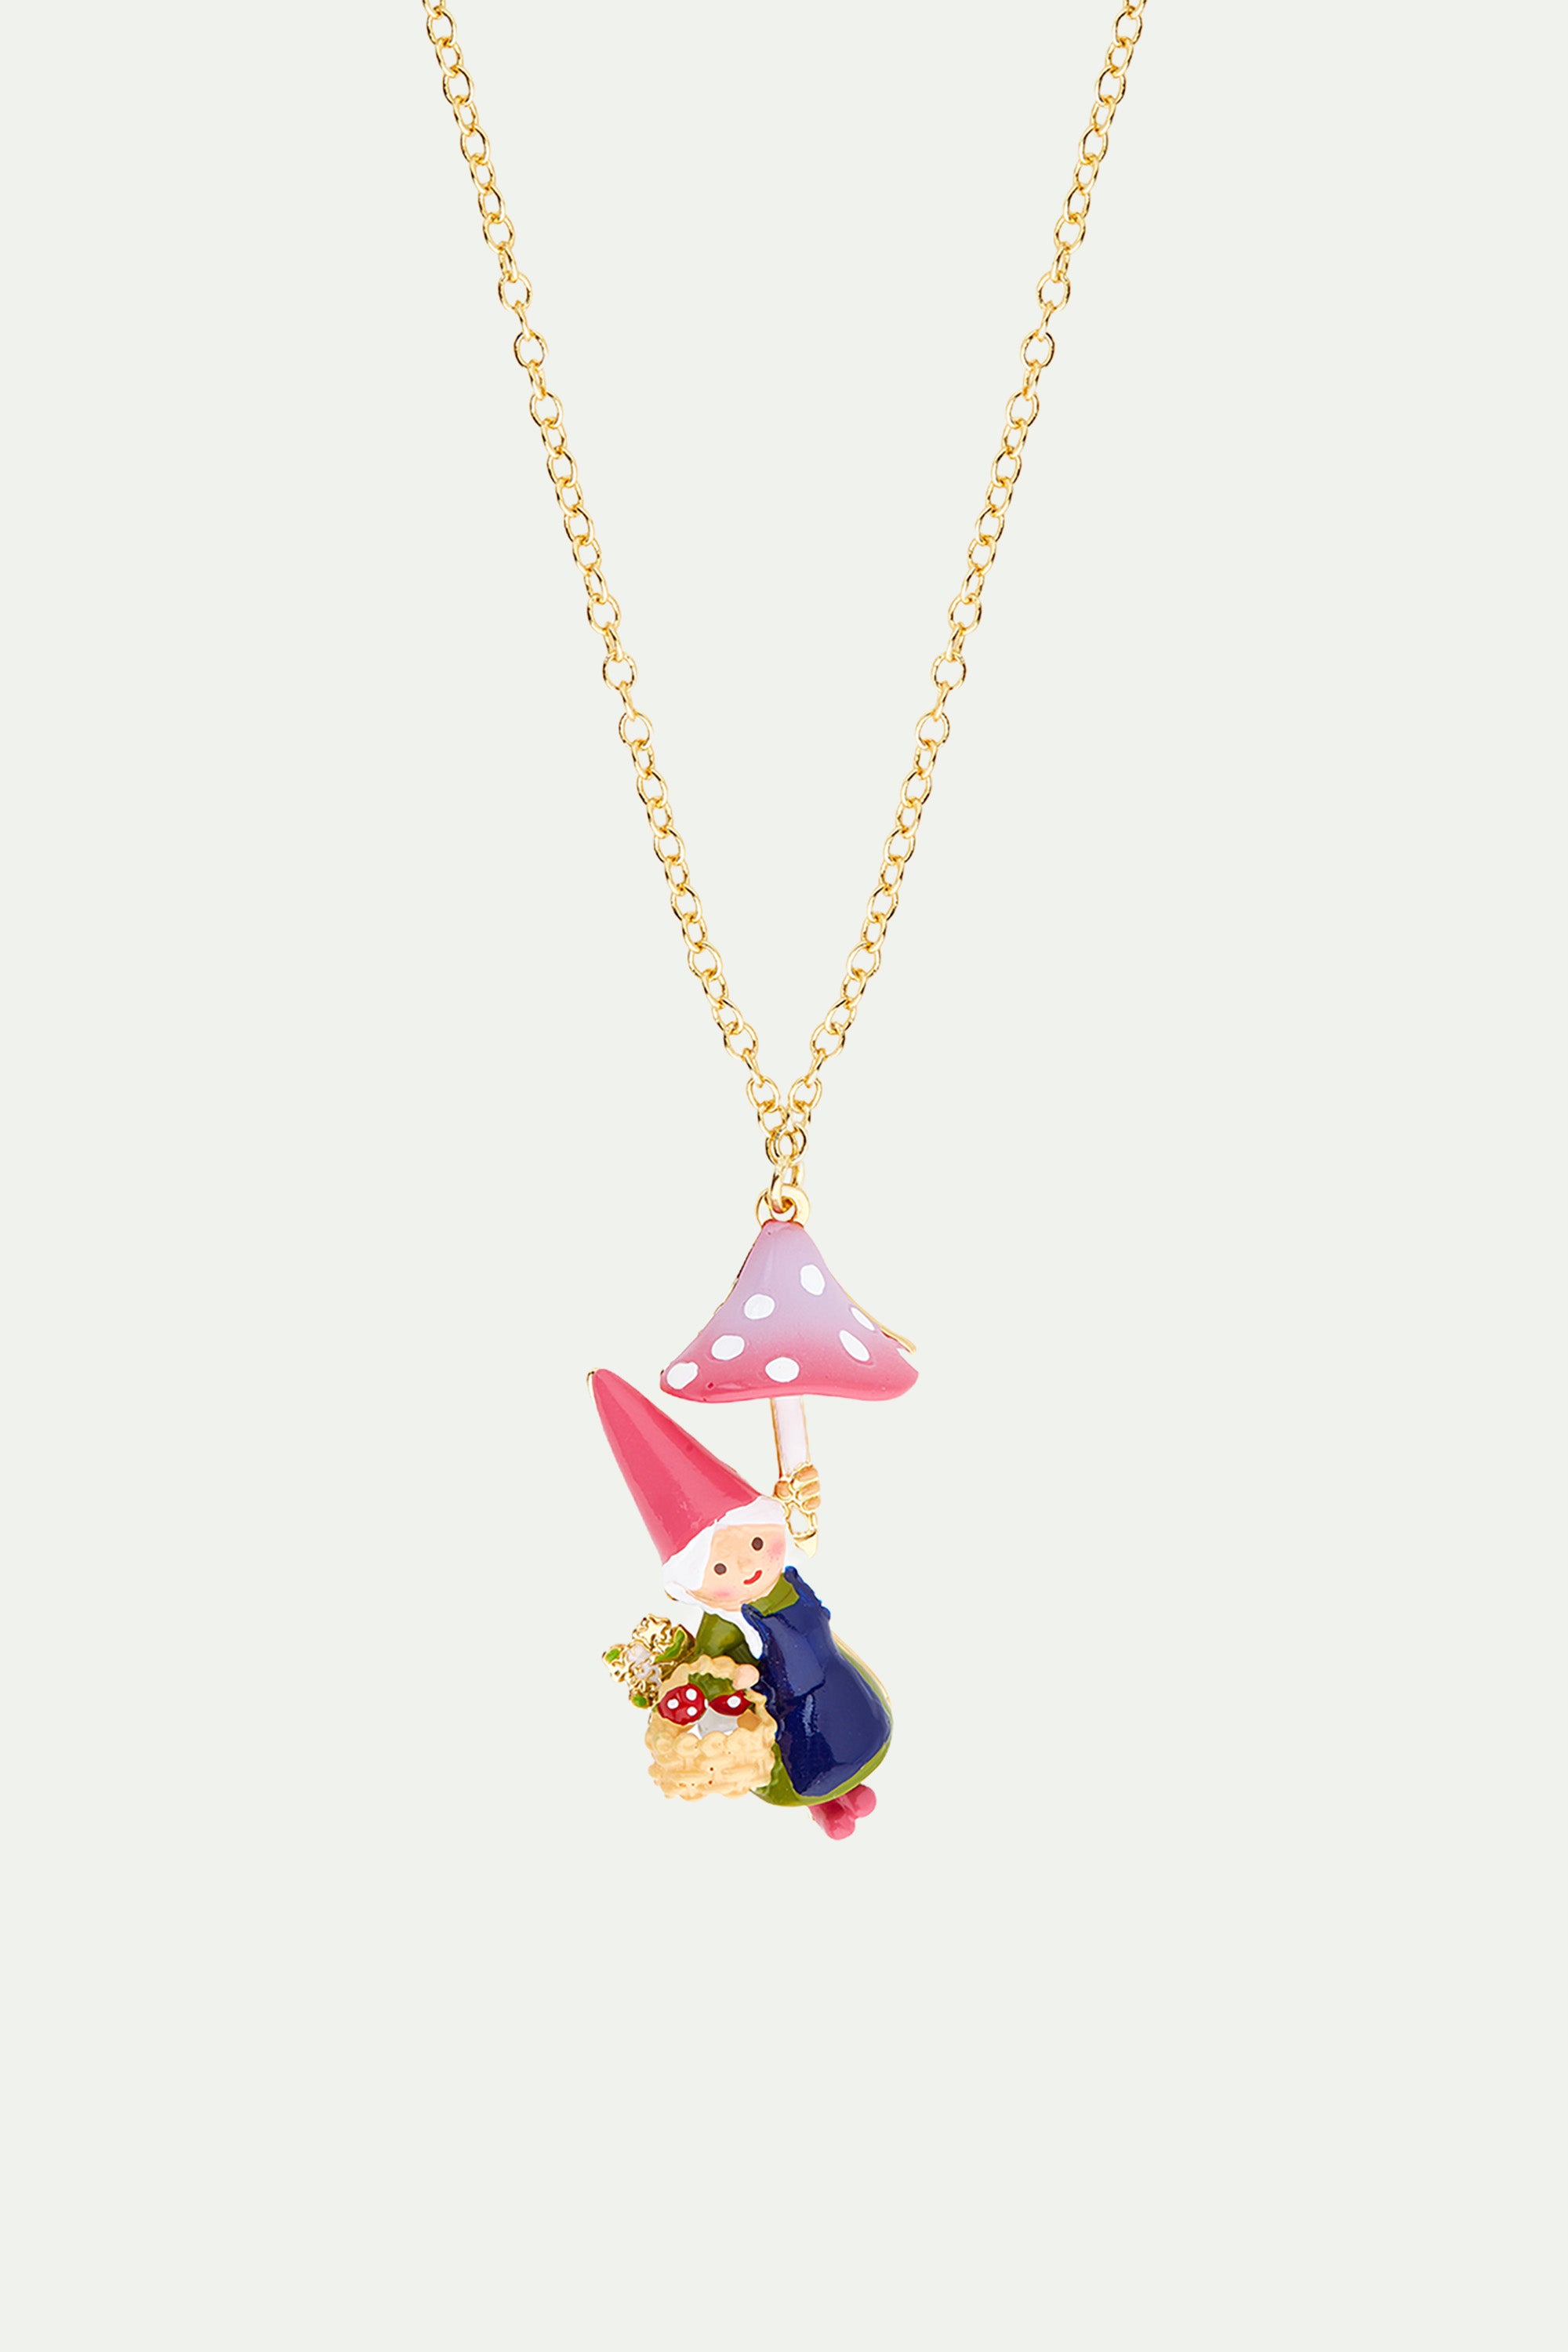 Garden gnome lady and mushroom picking pendant necklace